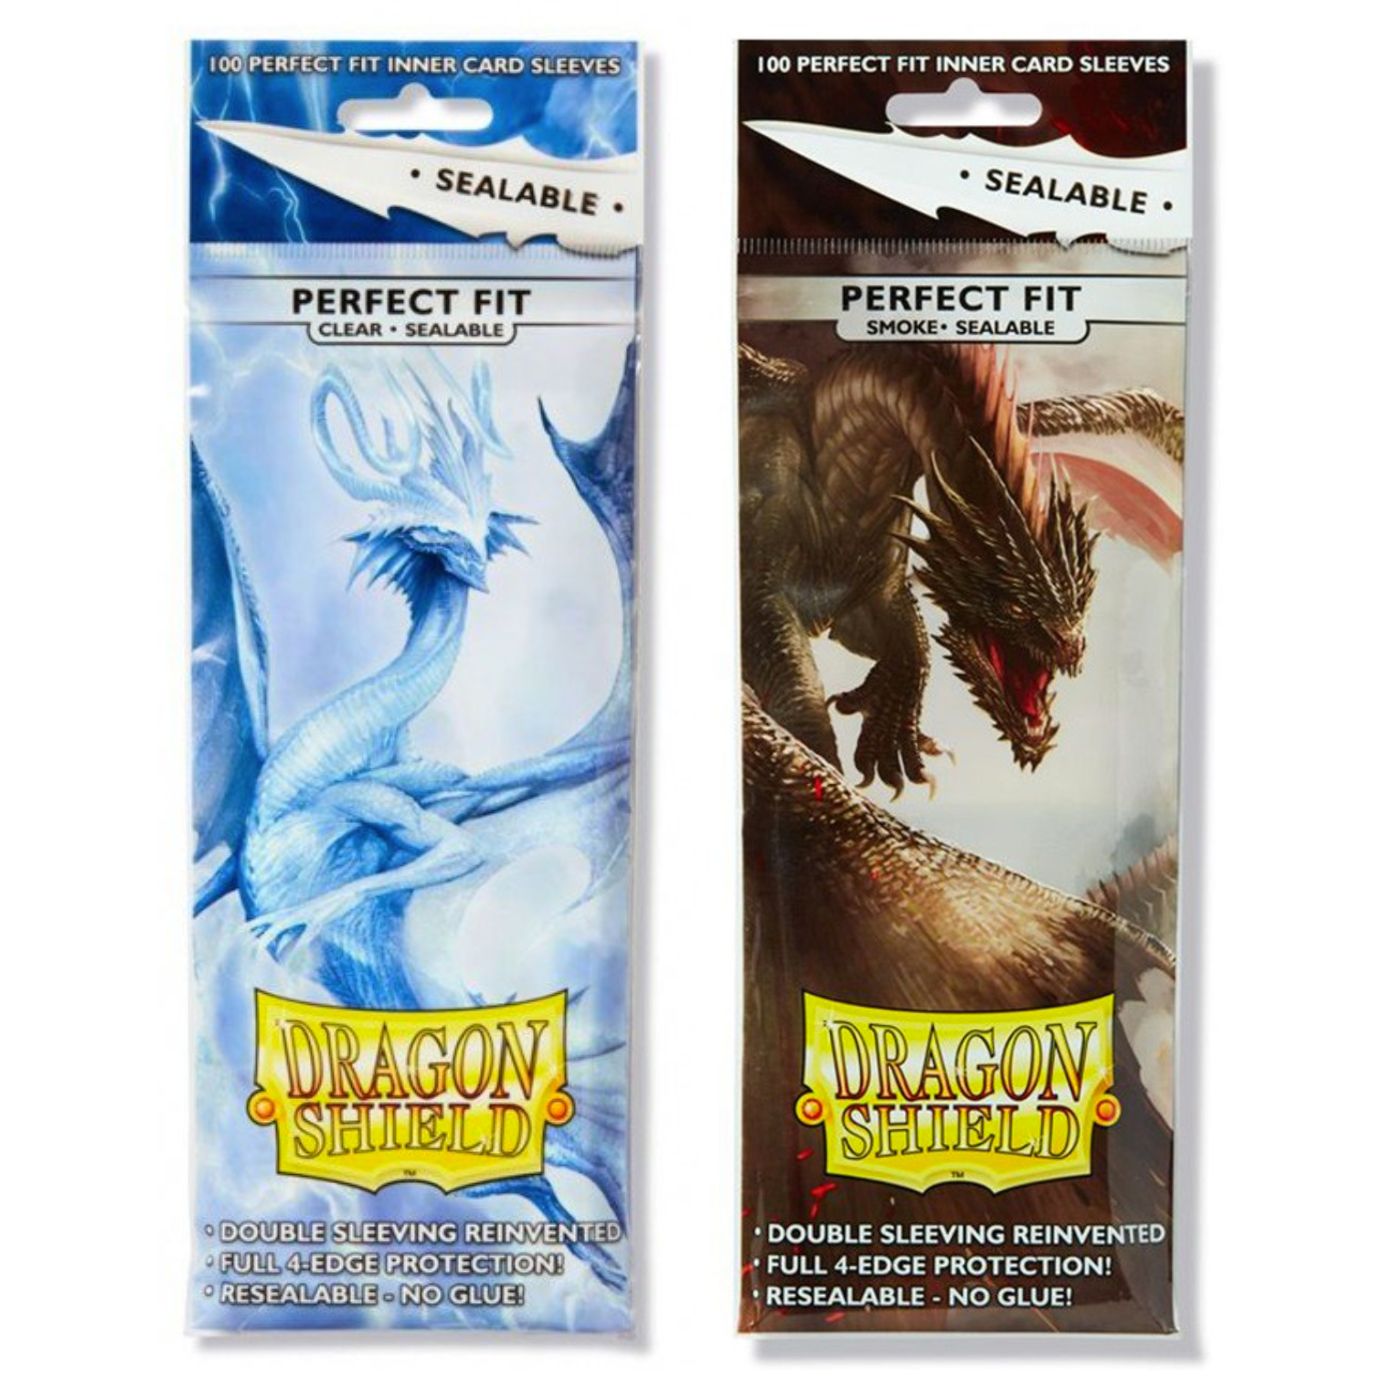 Dragon Shield Smoke - Sealable Perfect Fit Sleeves - Standard Size